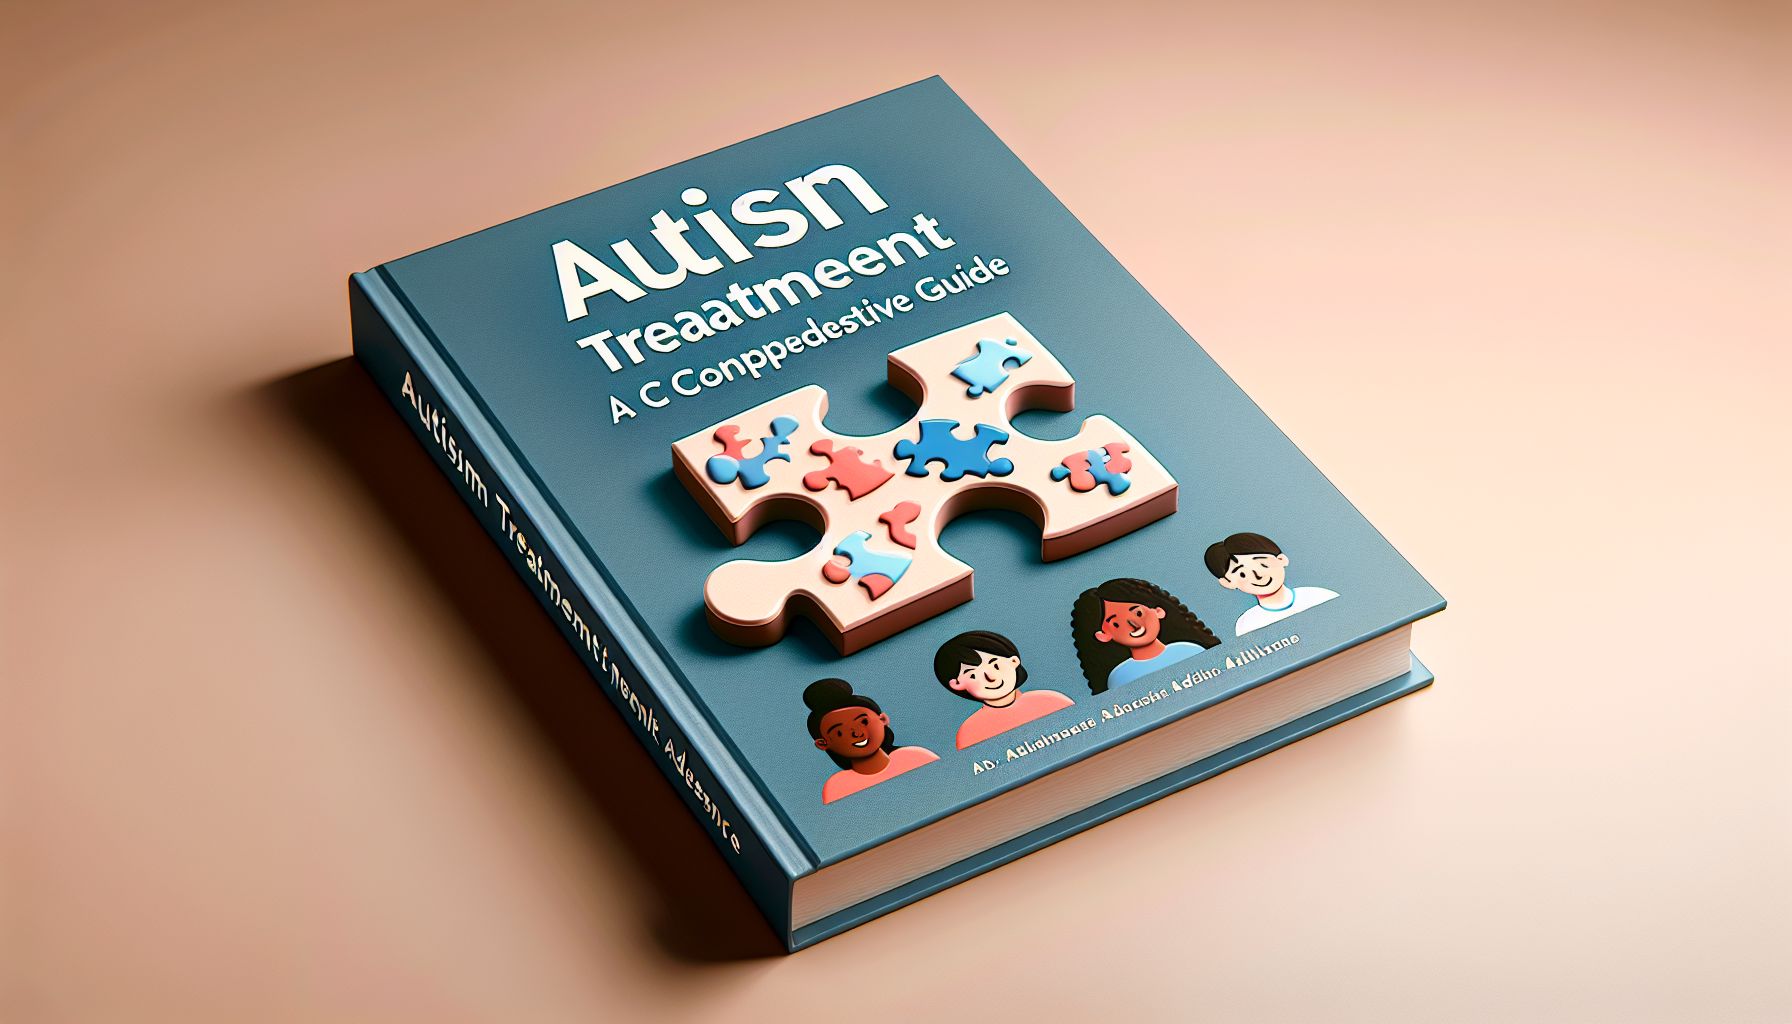 Autism Treatment in Adolescence: A Comprehensive Guide